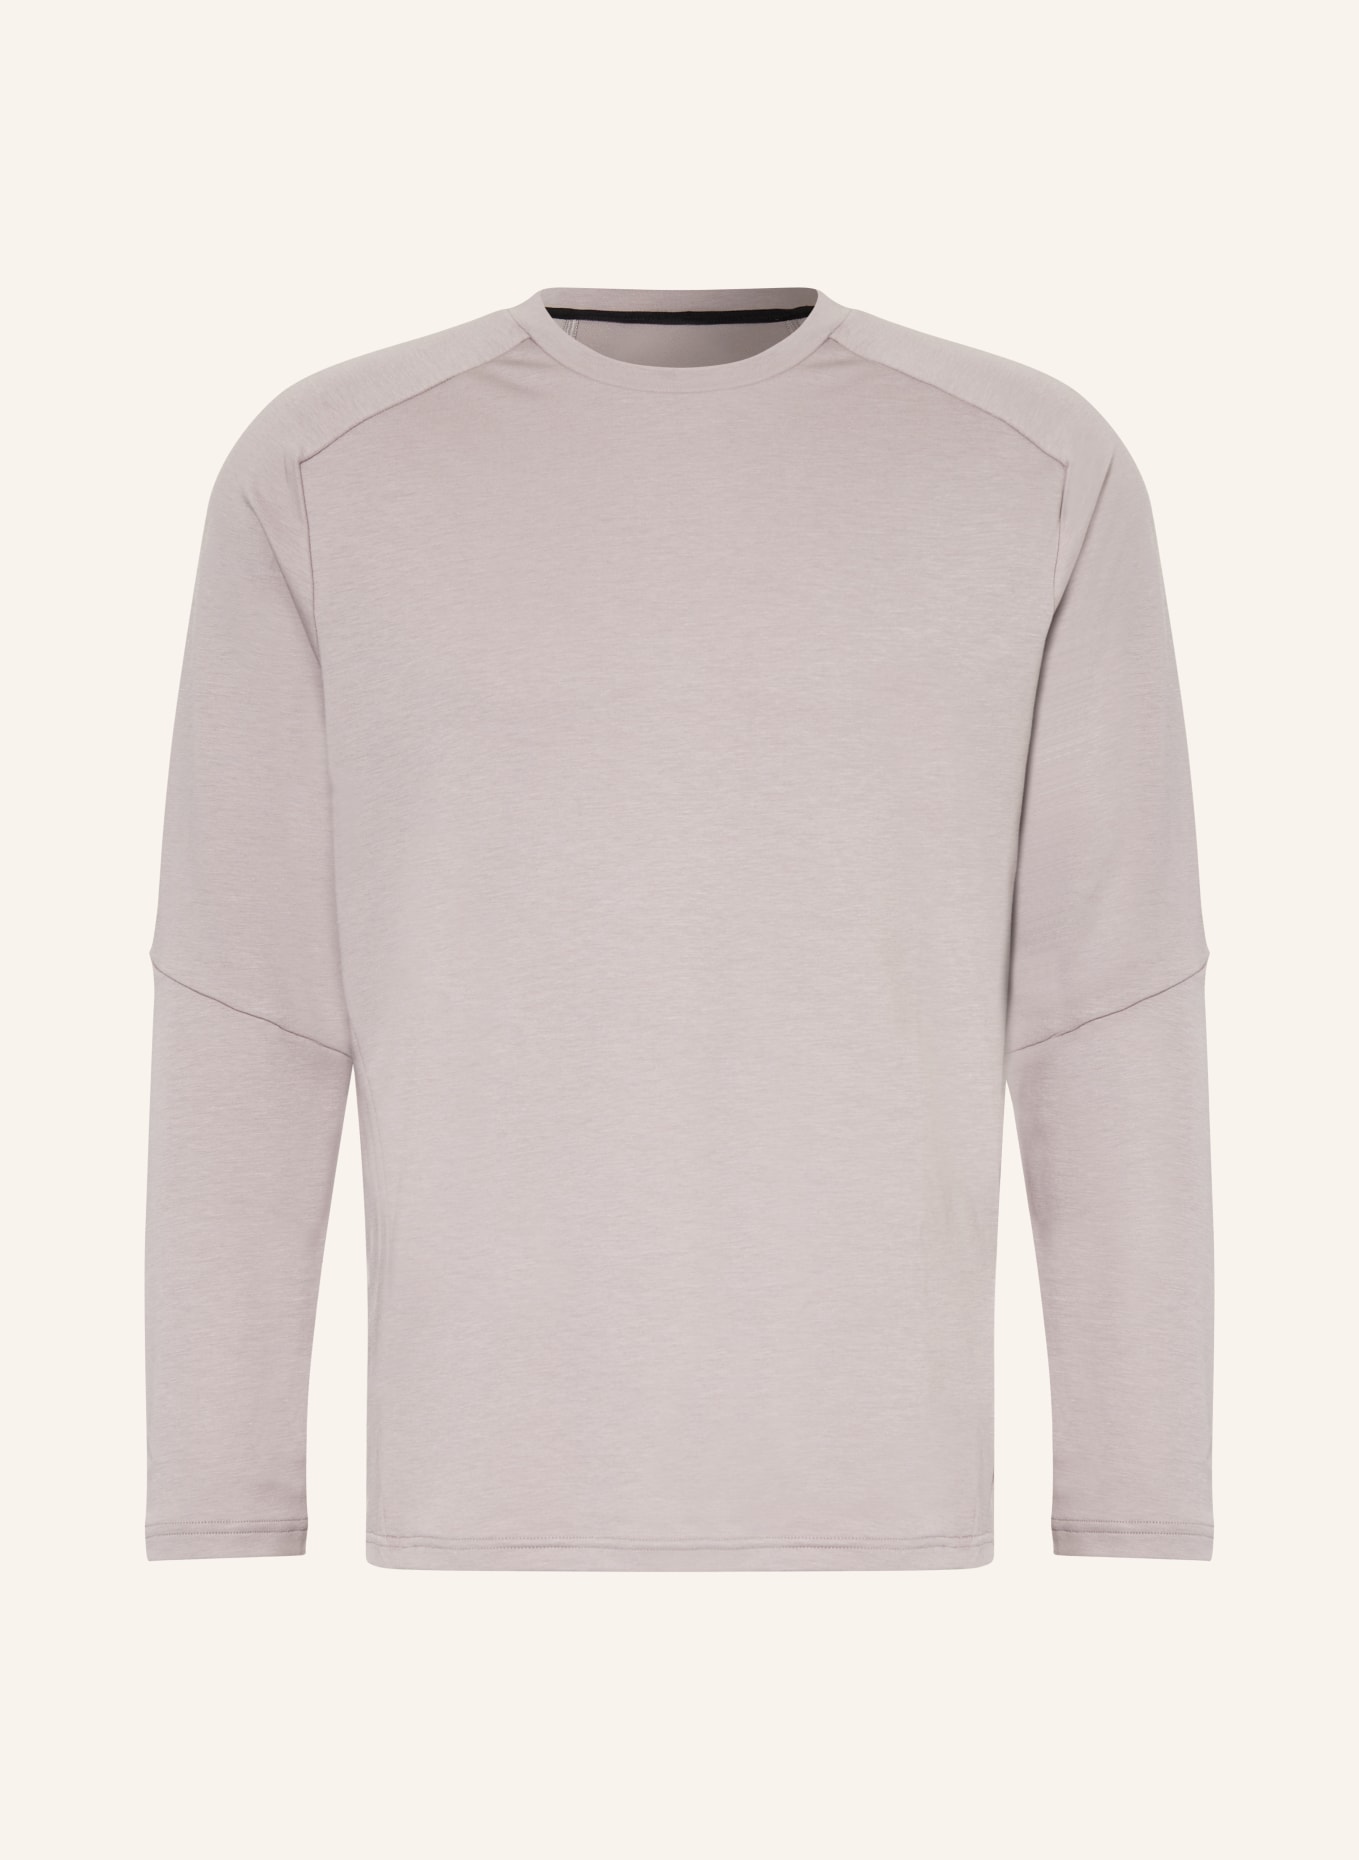 On Long sleeve shirt FOCUS LONG-T, Color: GRAY (Image 1)